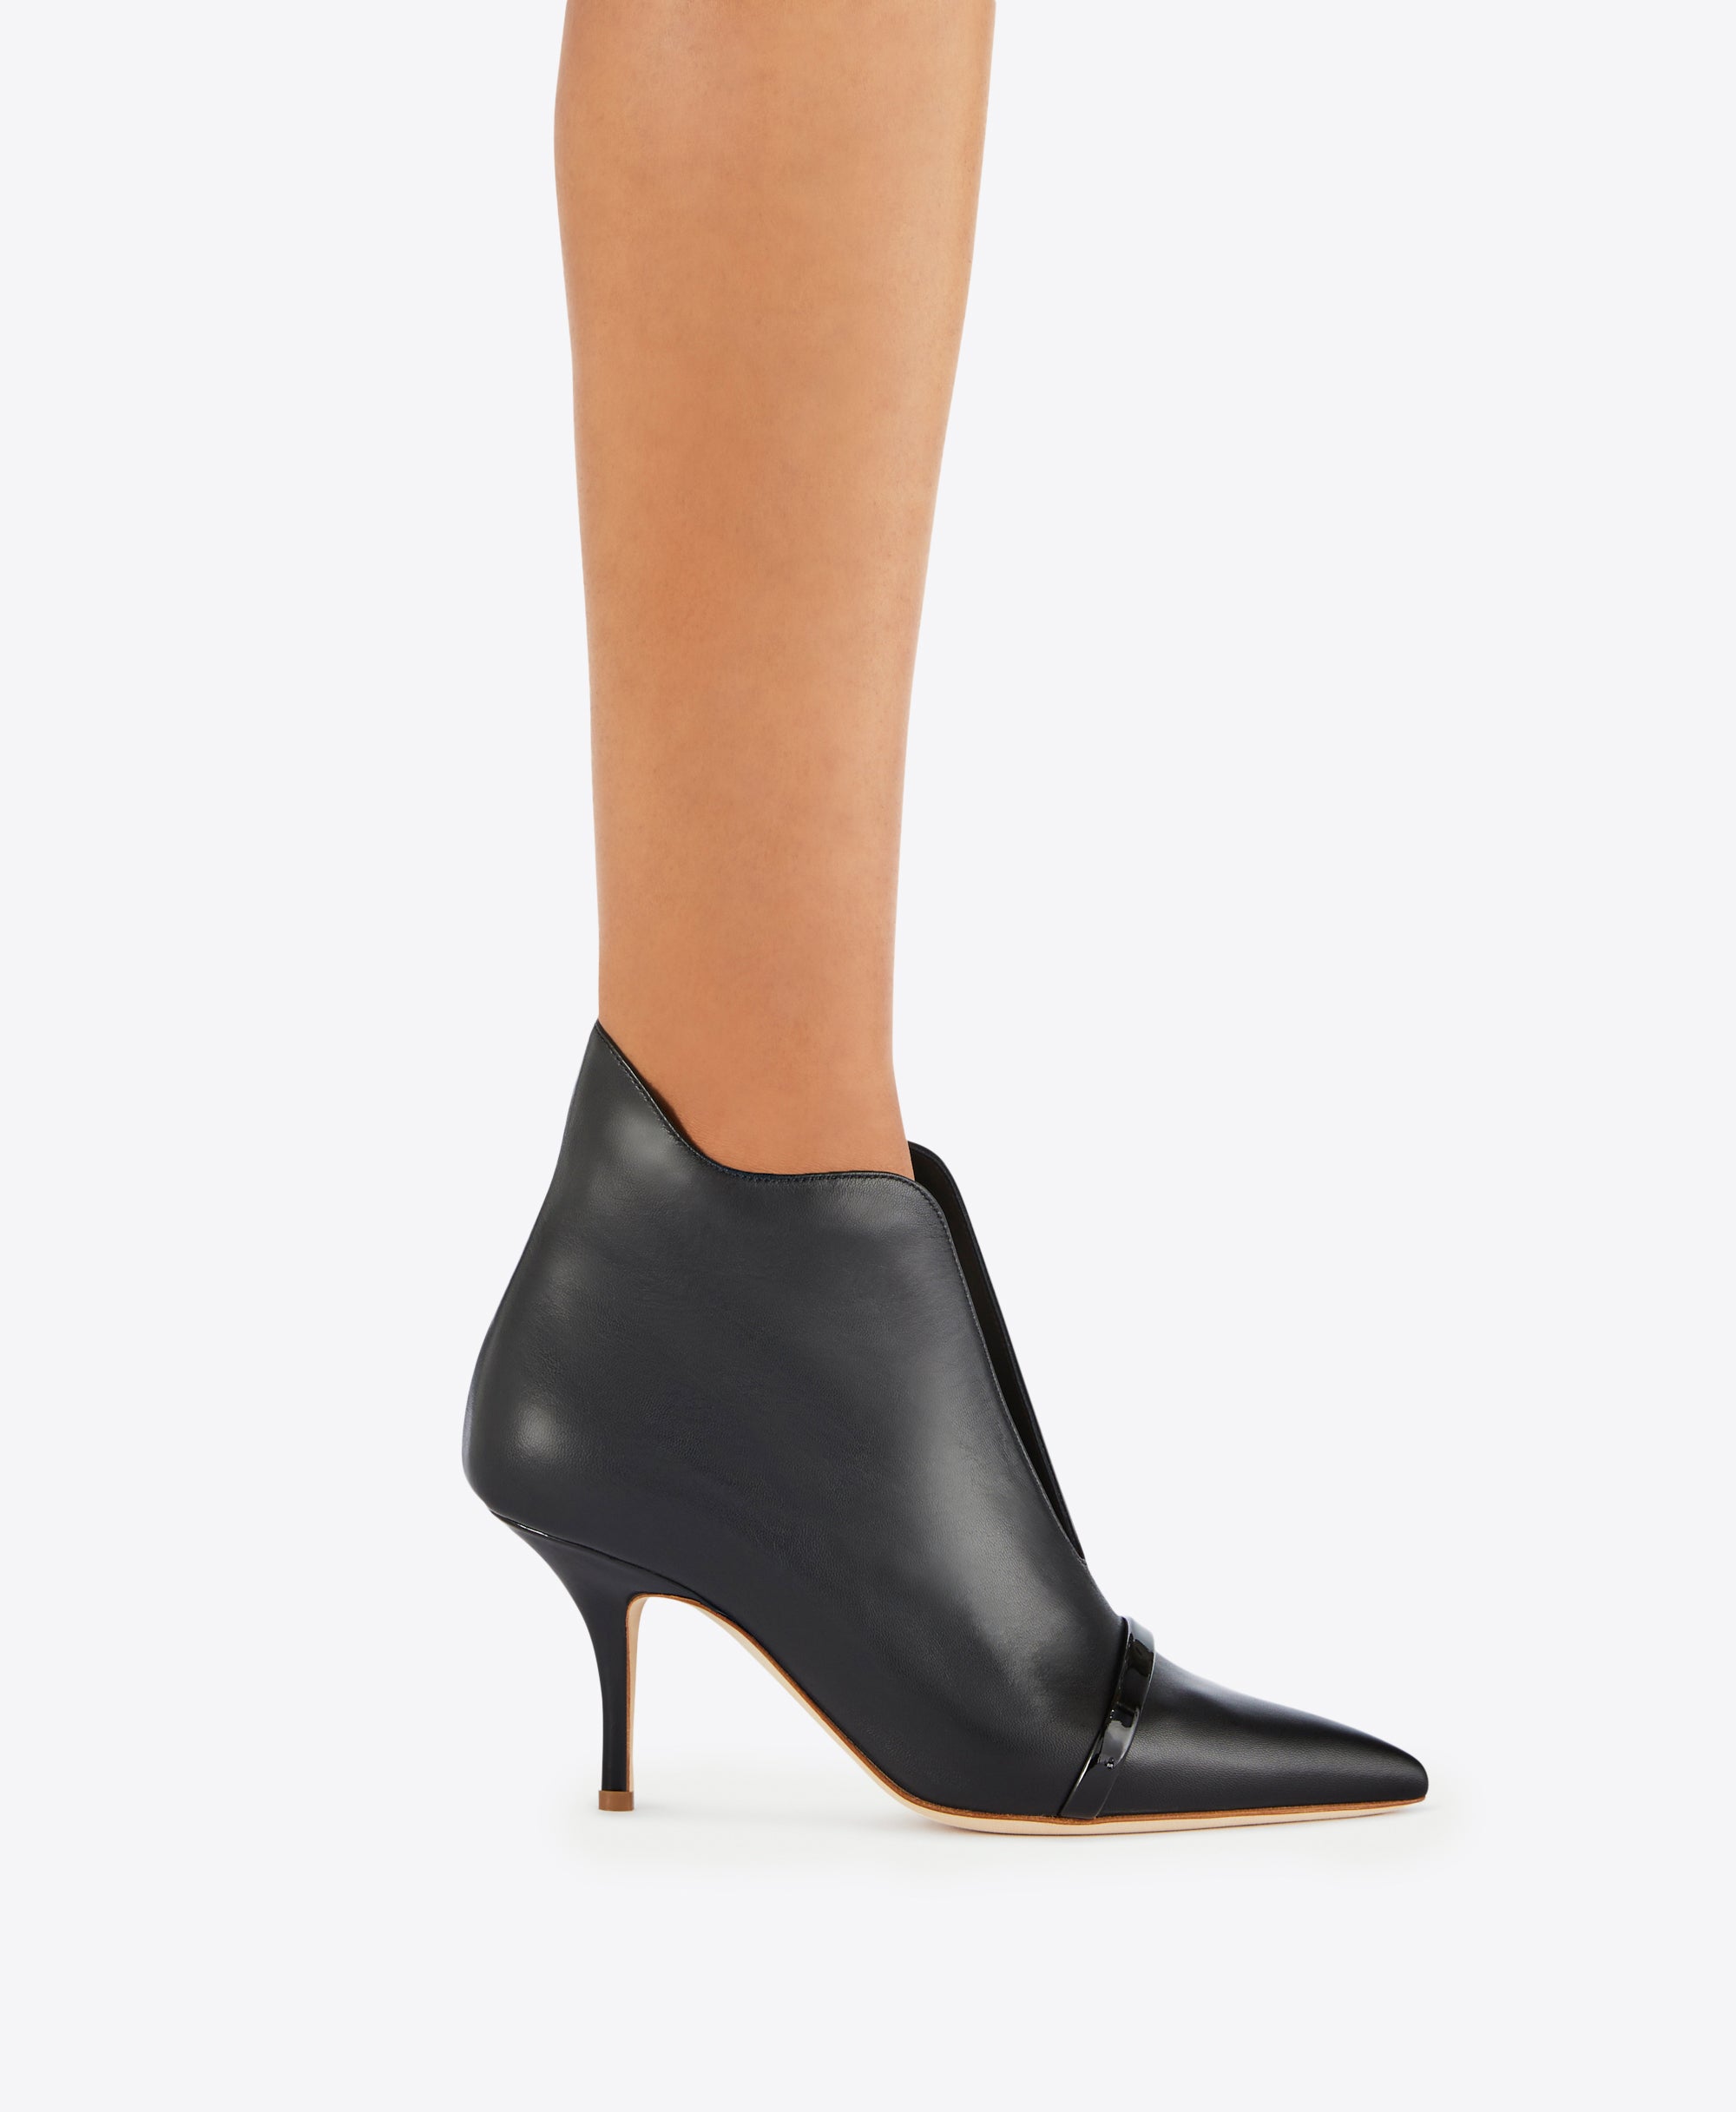 Cora 70 - Black Leather Ankle Boot